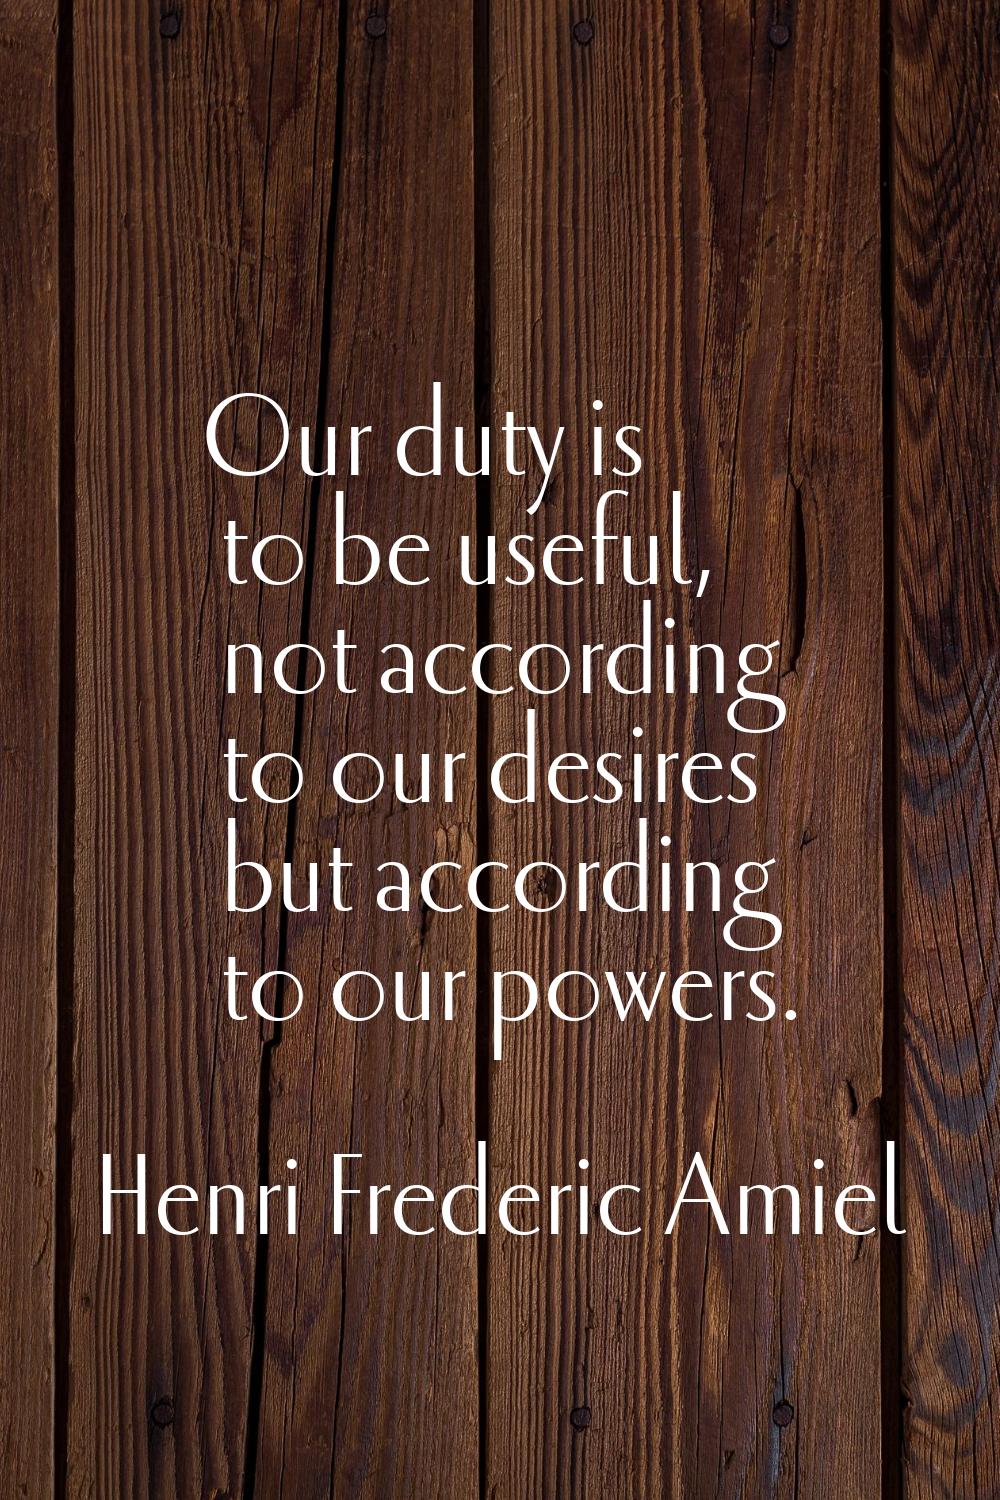 Our duty is to be useful, not according to our desires but according to our powers.